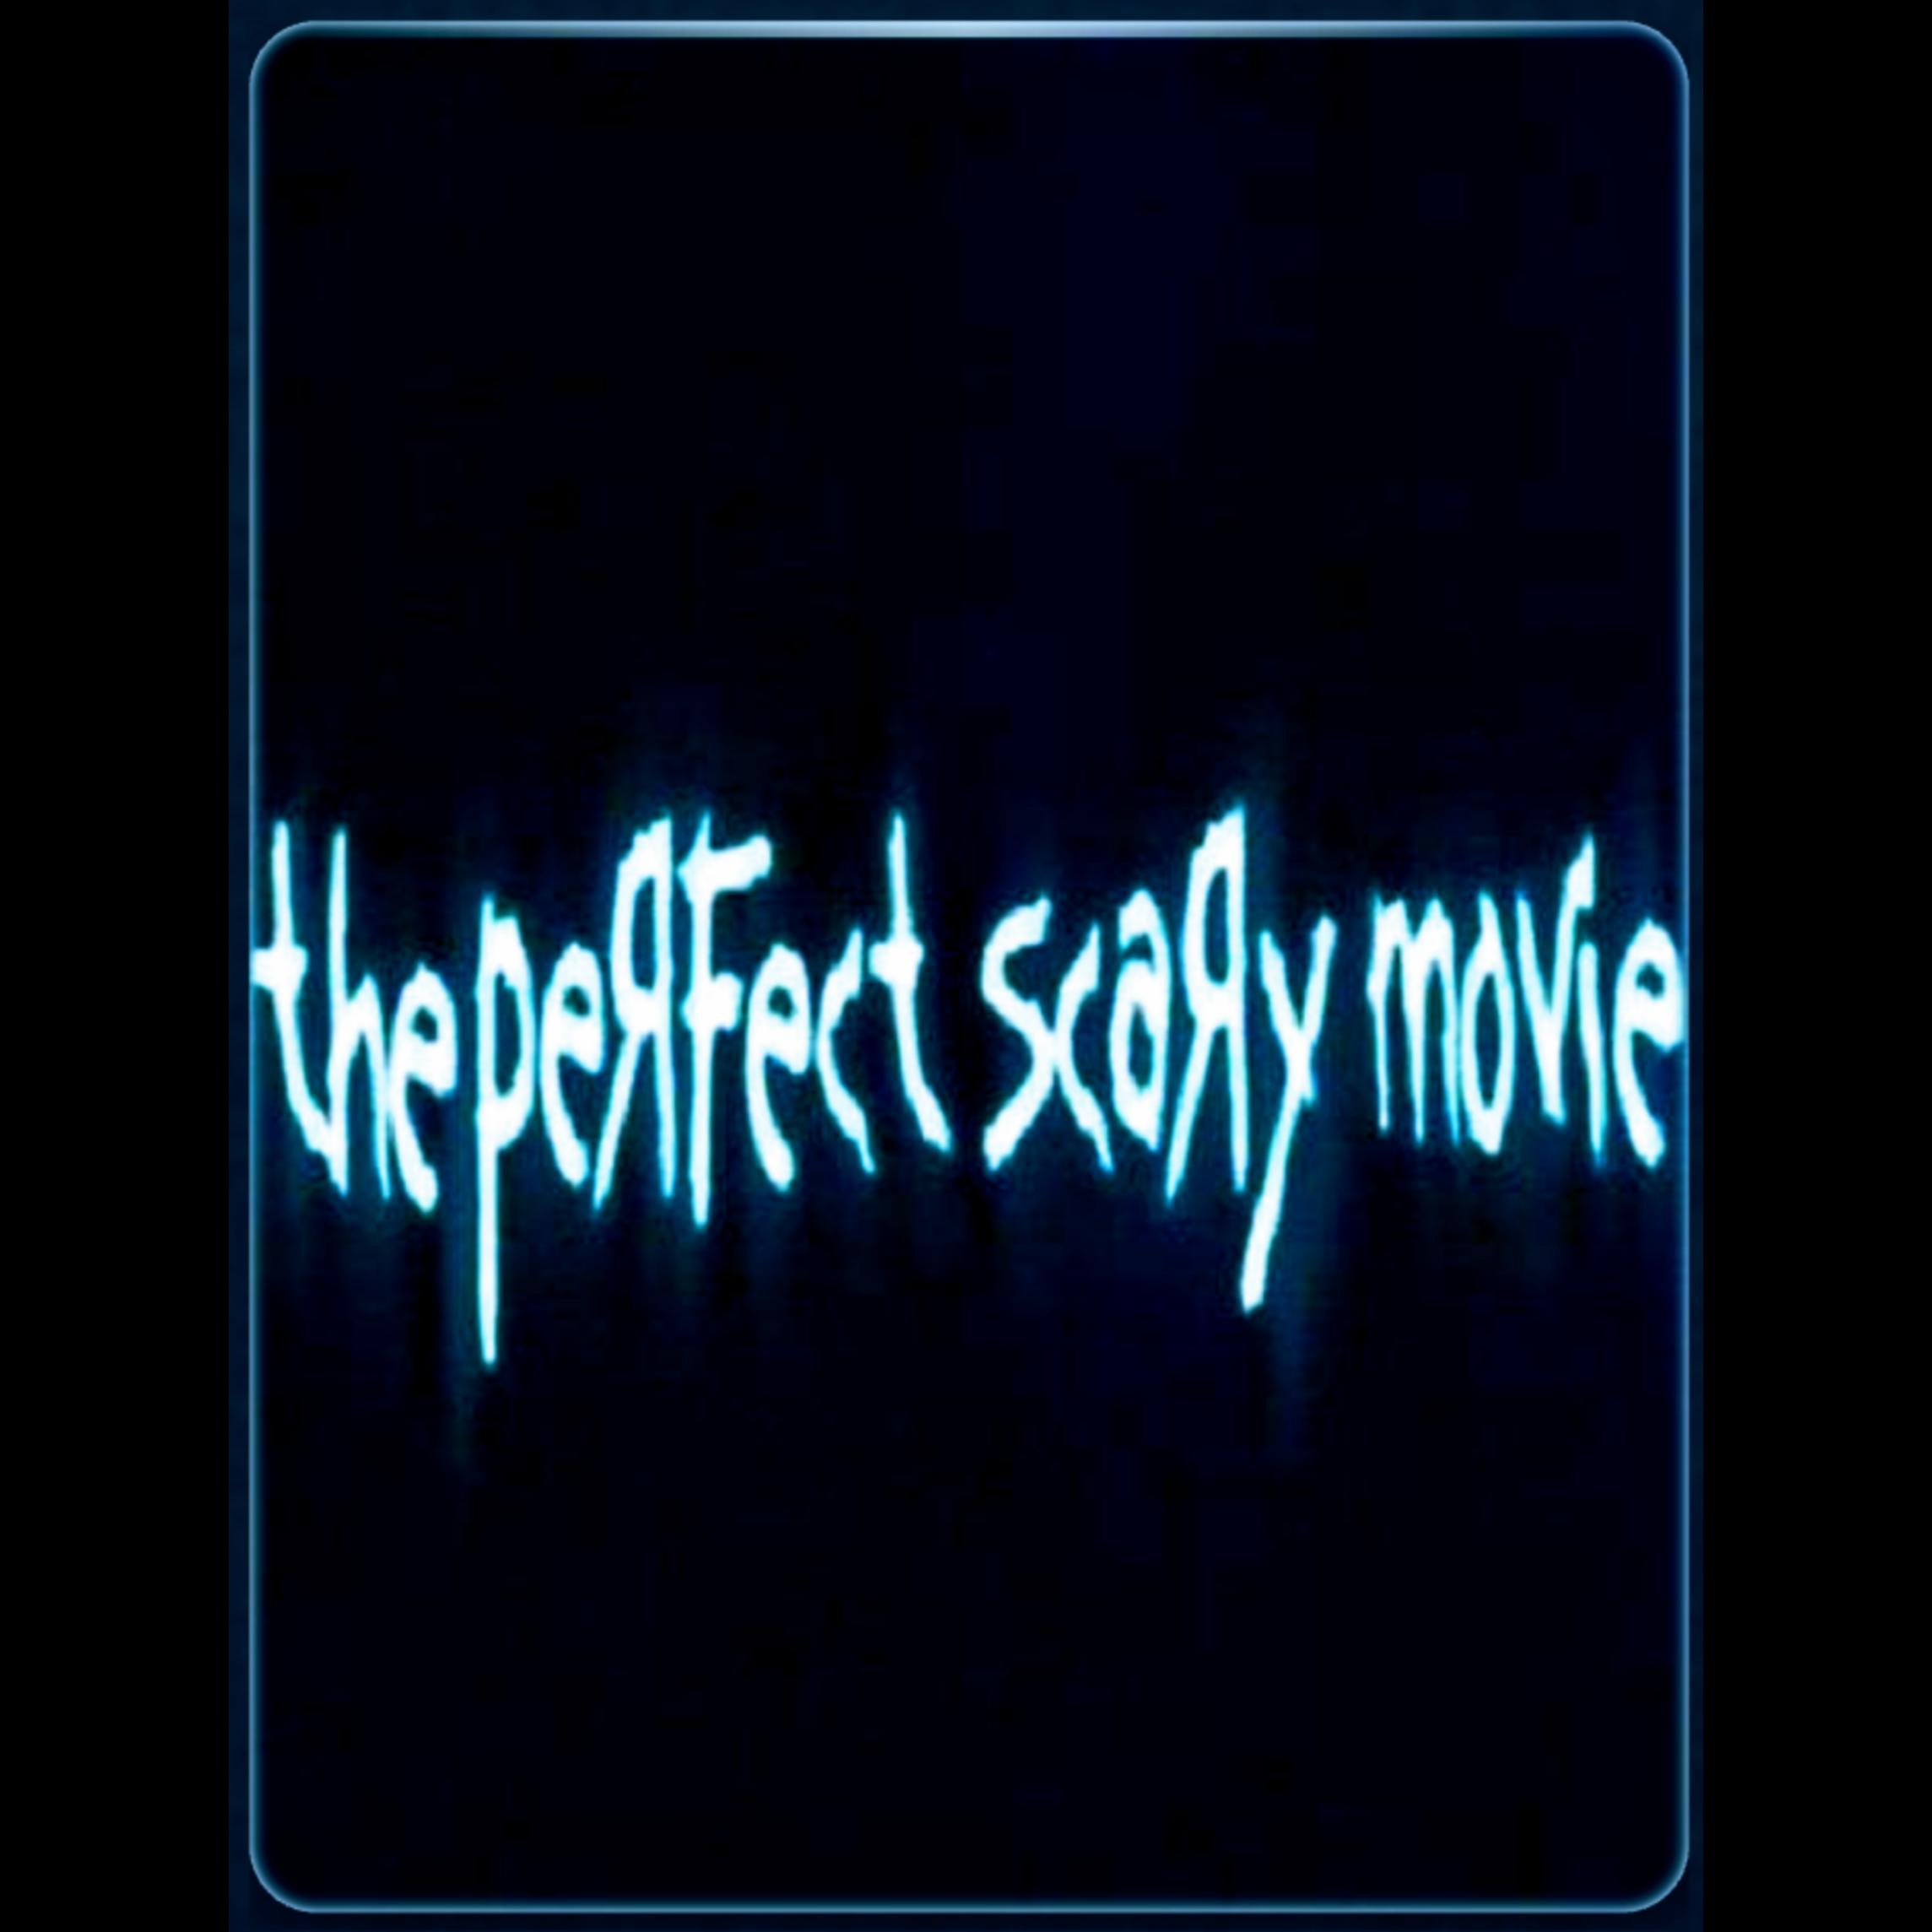 The Perfect Scary Movie (2005) Screenshot 1